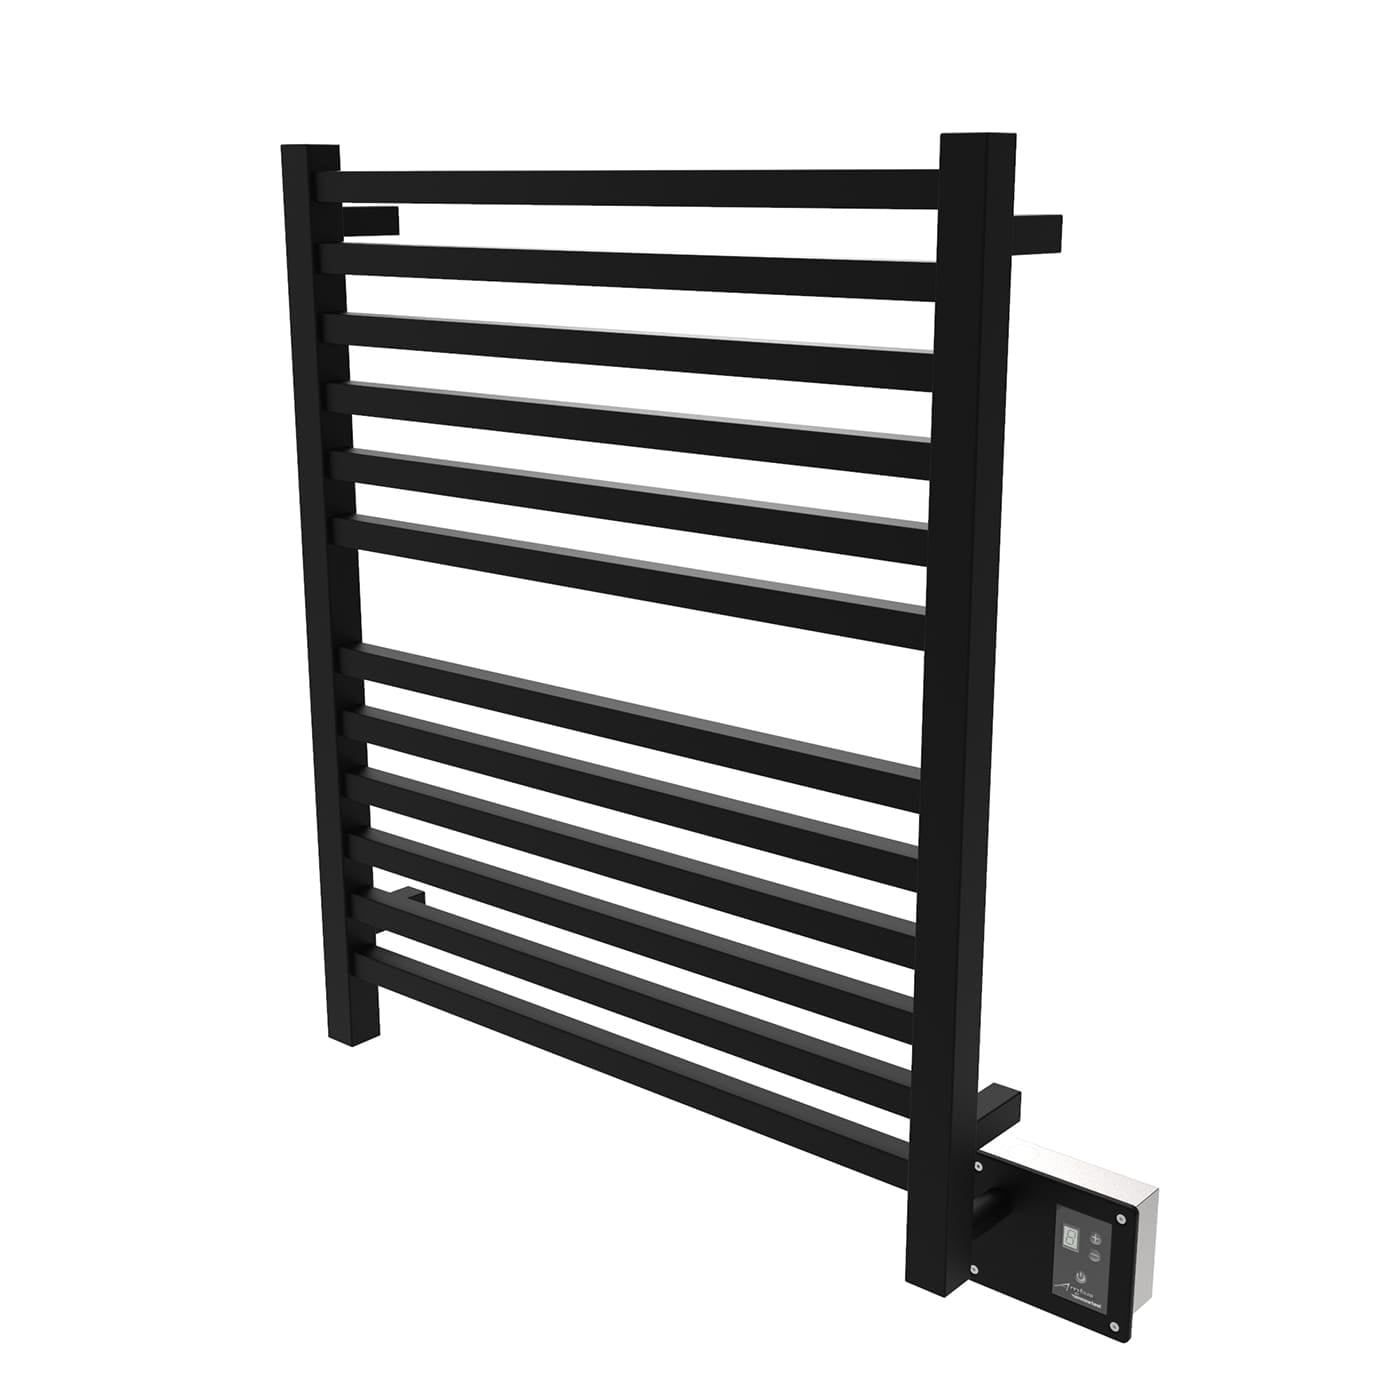 Picture of Amba Q2833MB 44.81 x 32.18 x 4 - 4.75 in. Towel Rack - Matte Black